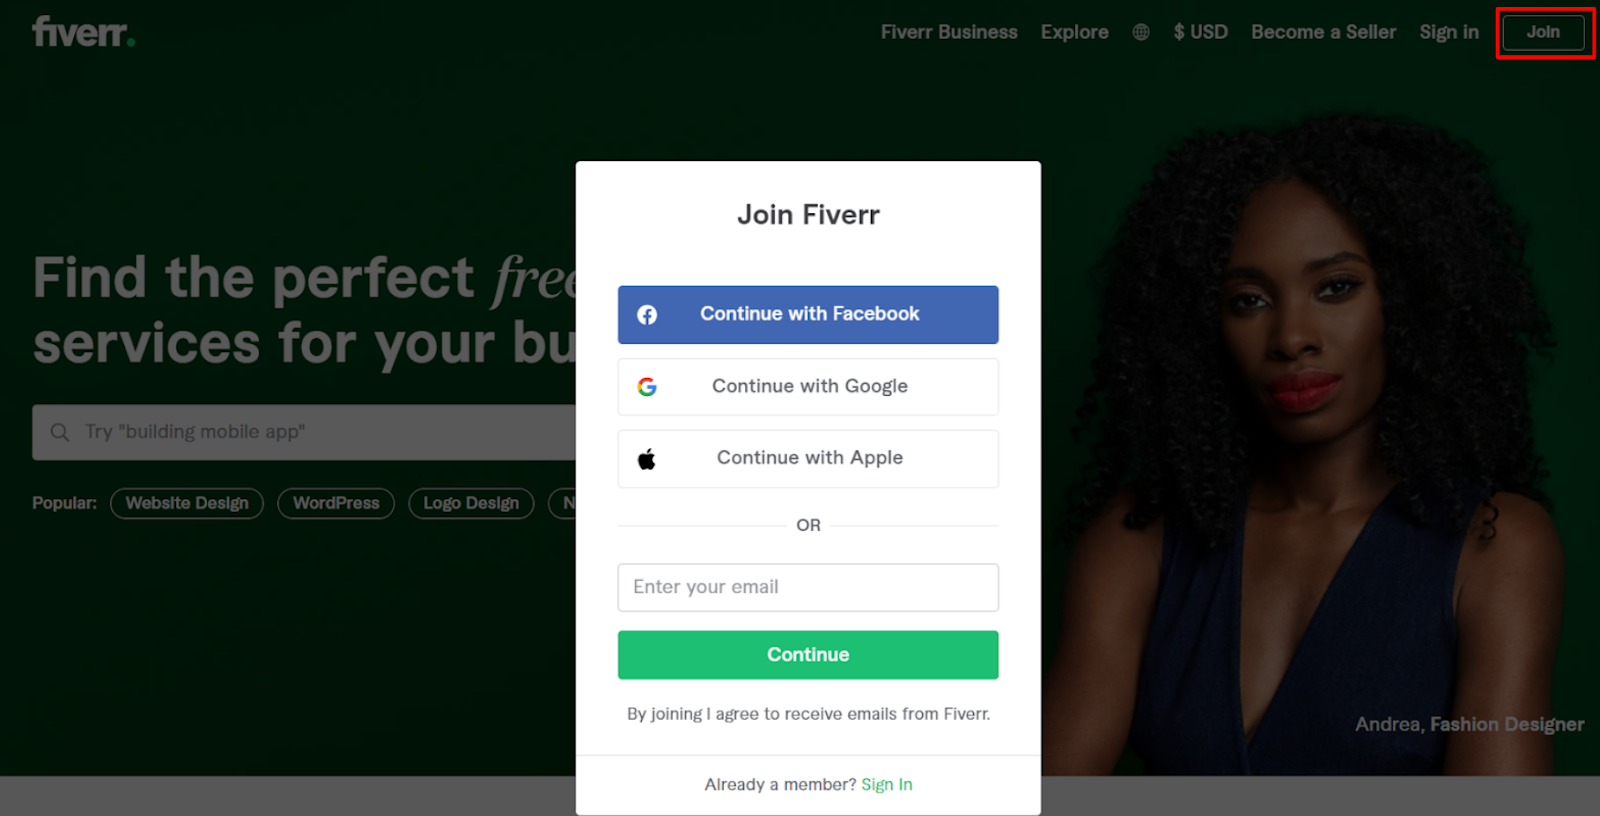 Fiverr homepage and join button